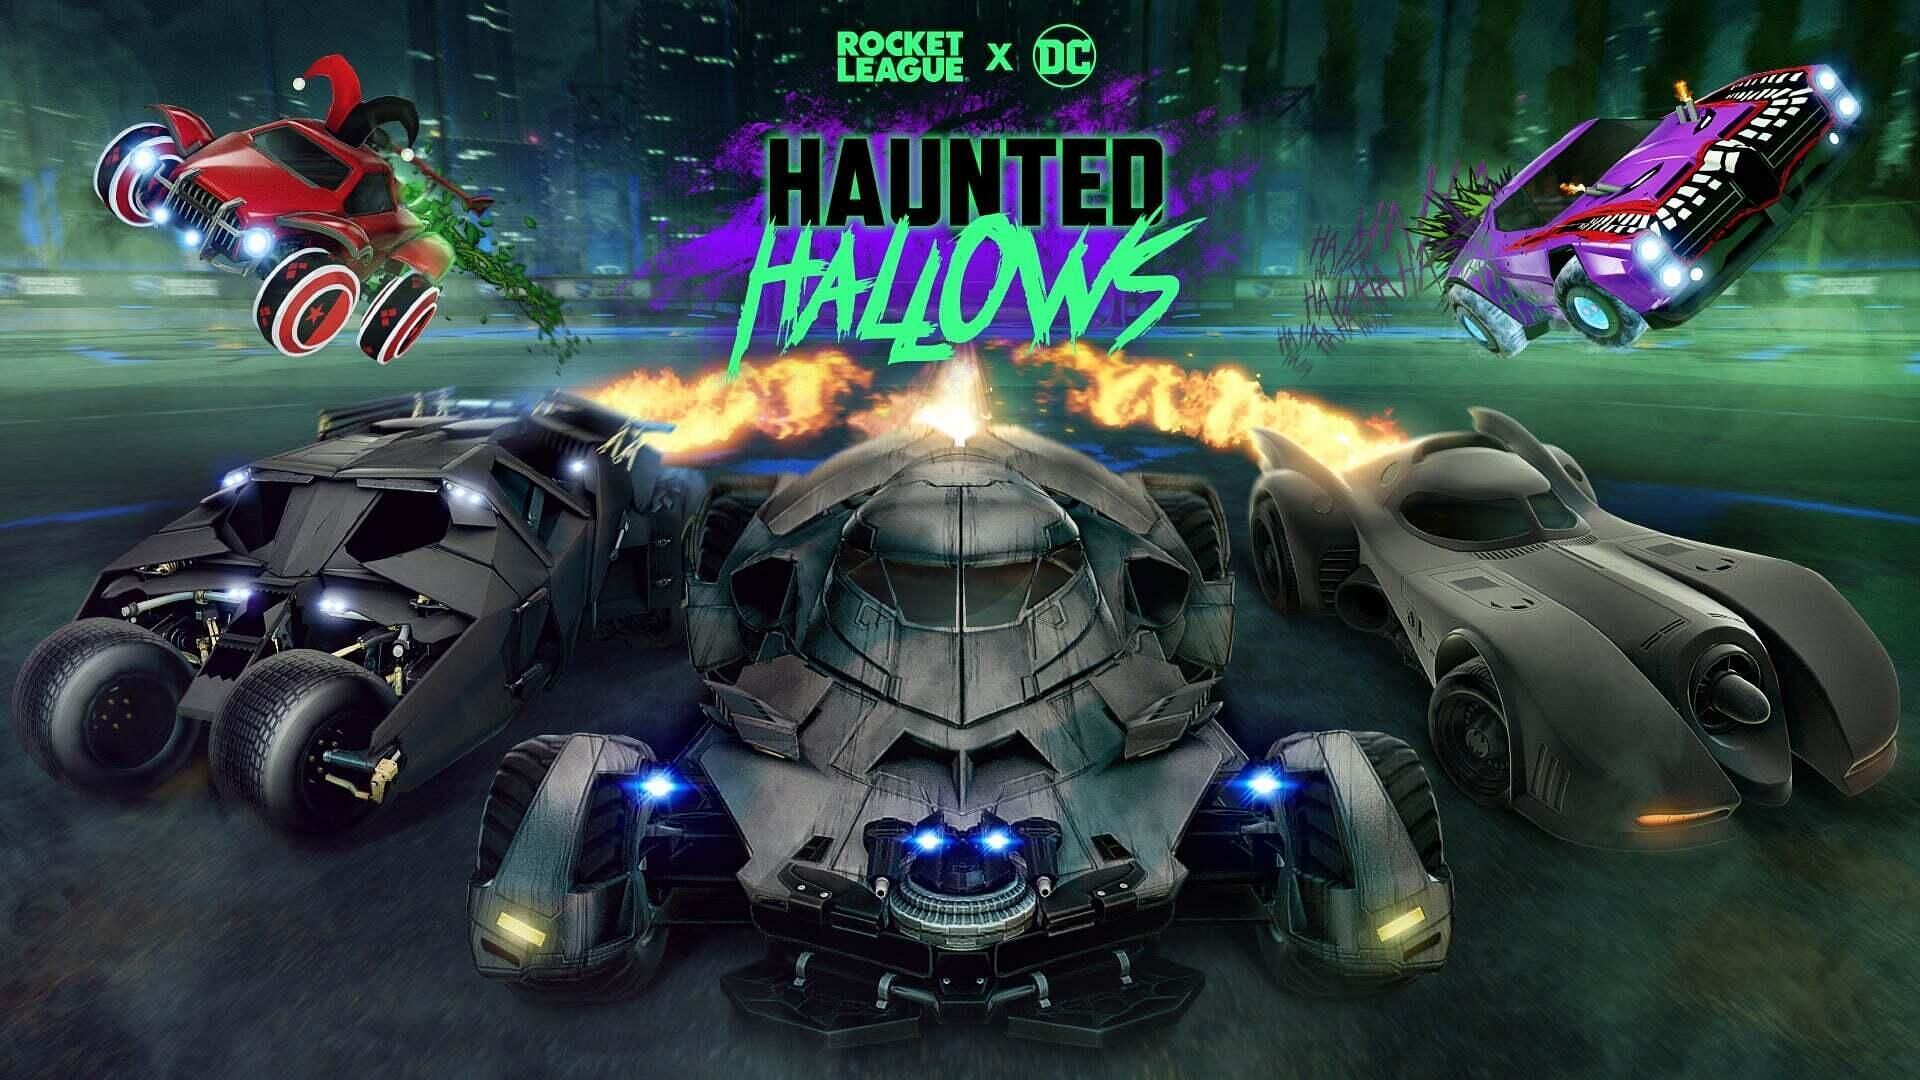 Rocket League Haunted Hallows event All you need to know